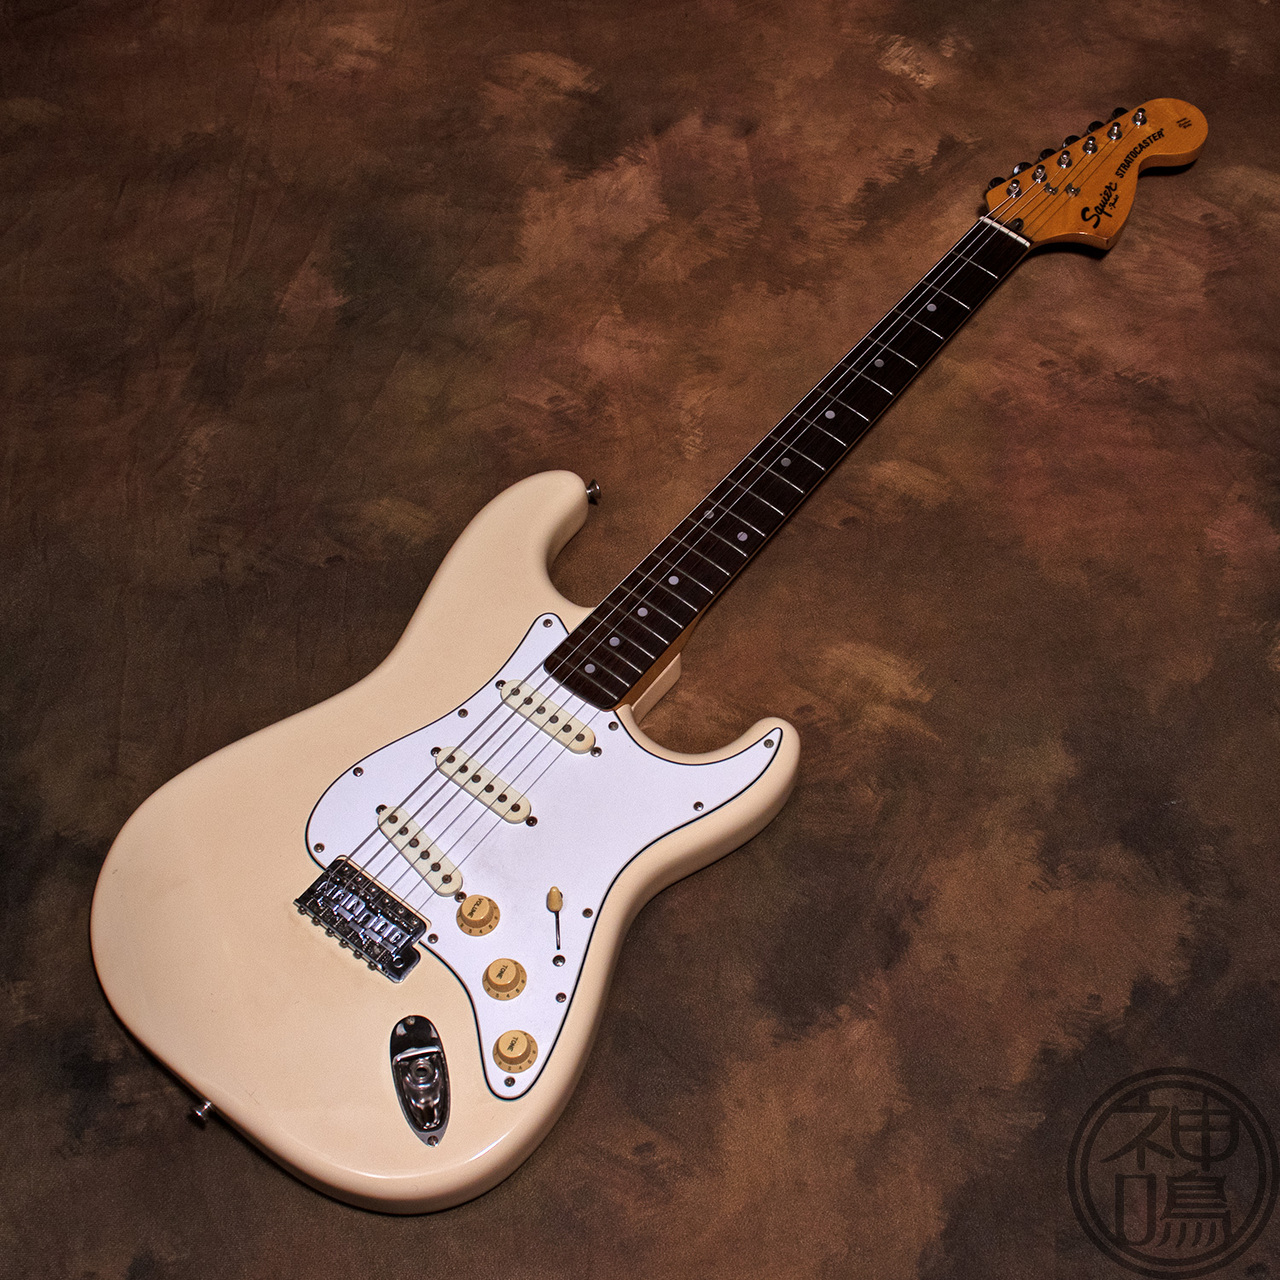 Squier by Fender Stratocaster CST-30【White/1984年製/フジゲン期SQ 